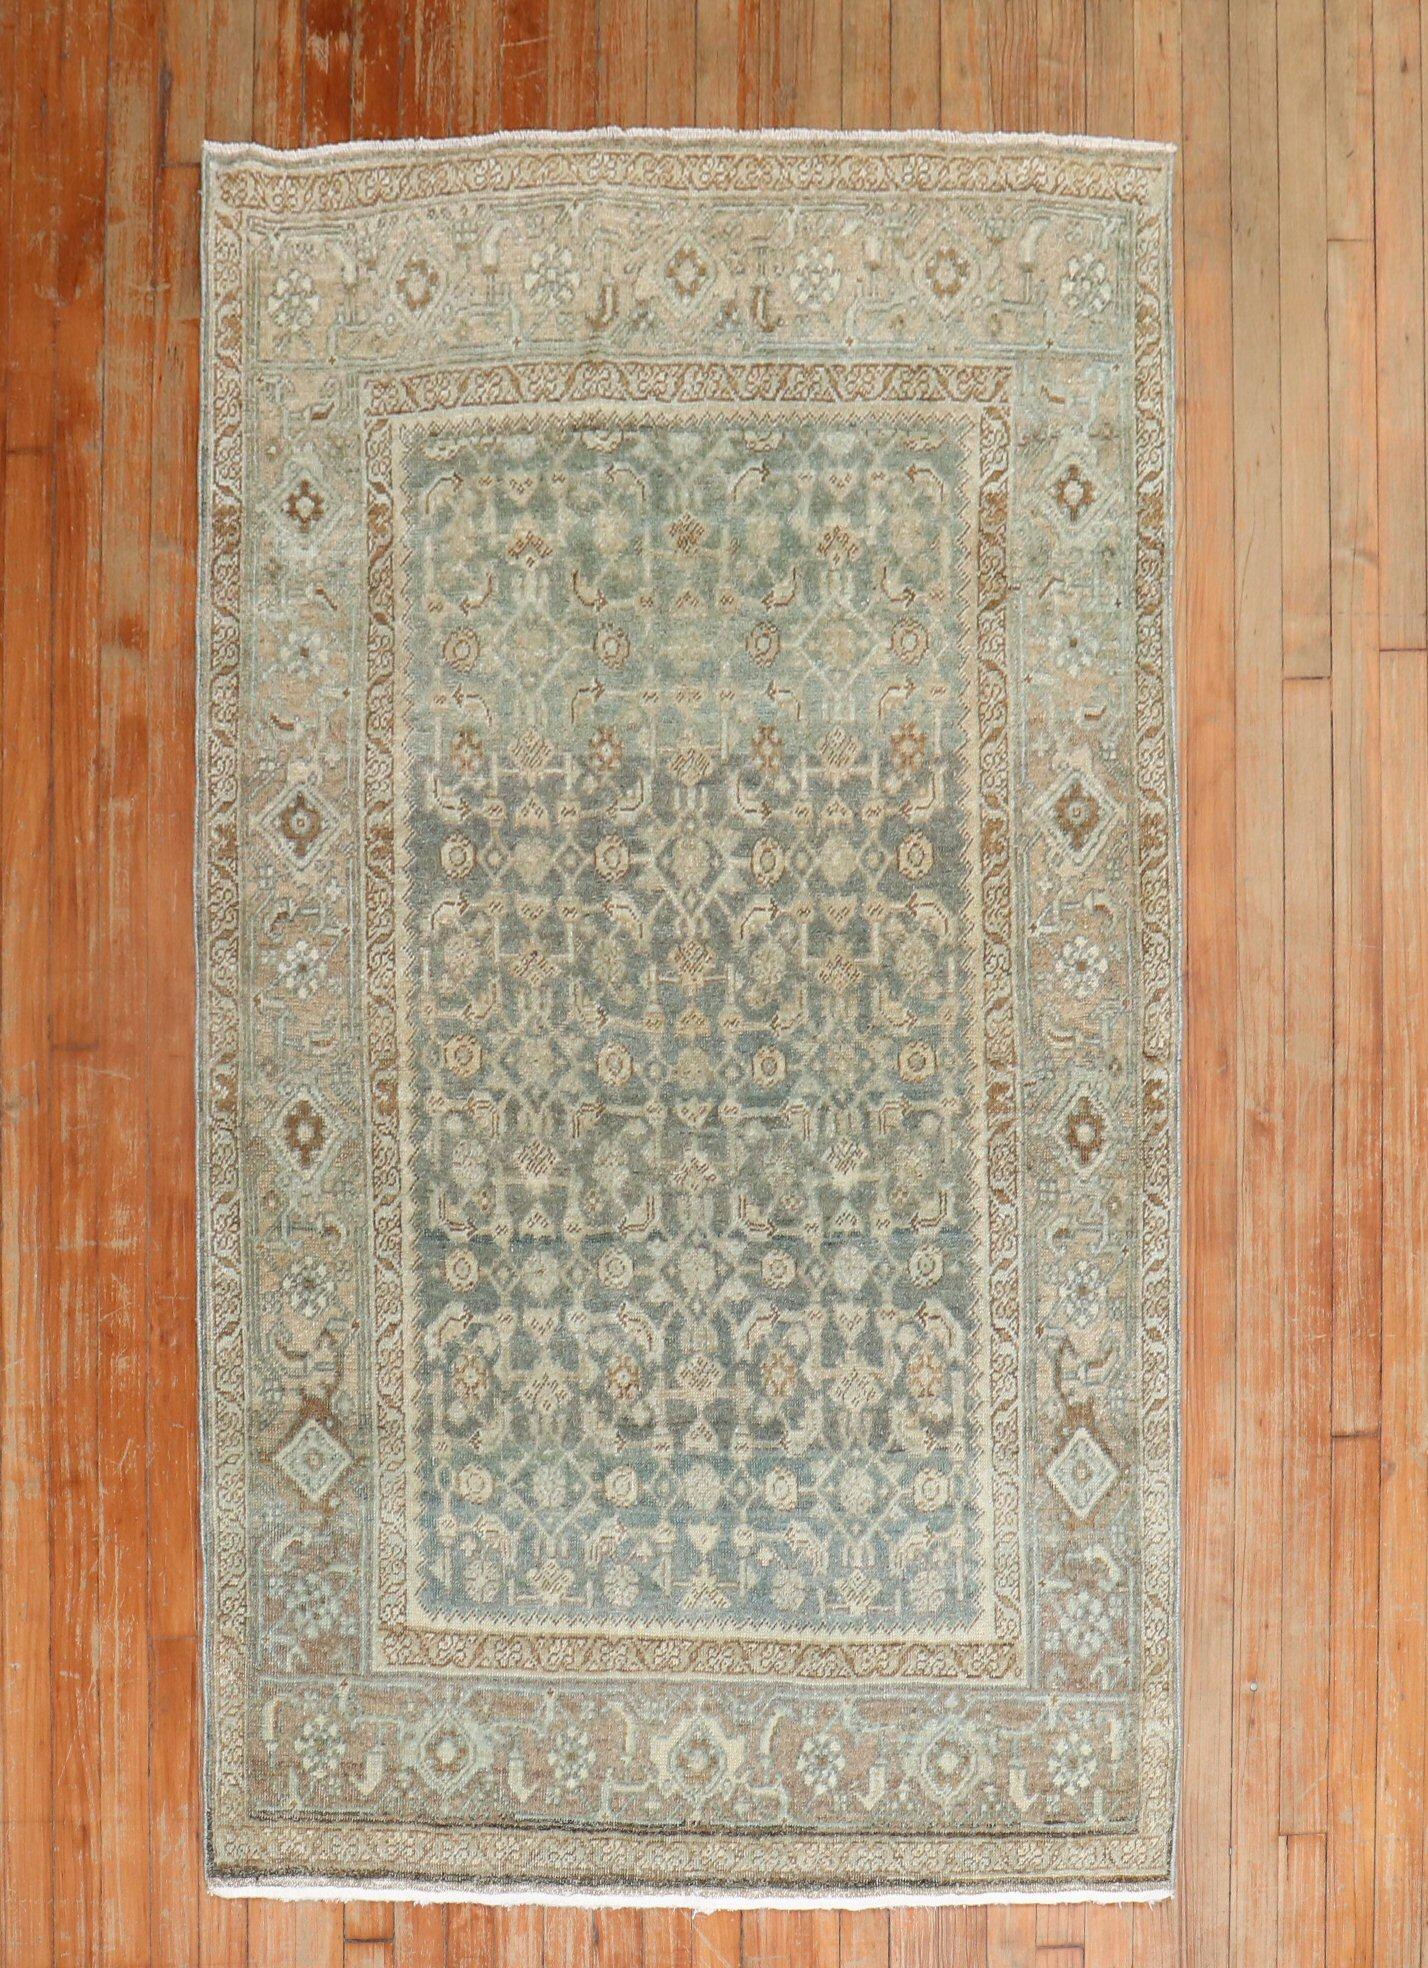 An accent size early 20th century Persian Malayer rug in green, khaki, and soft brown

Measures: 3'9